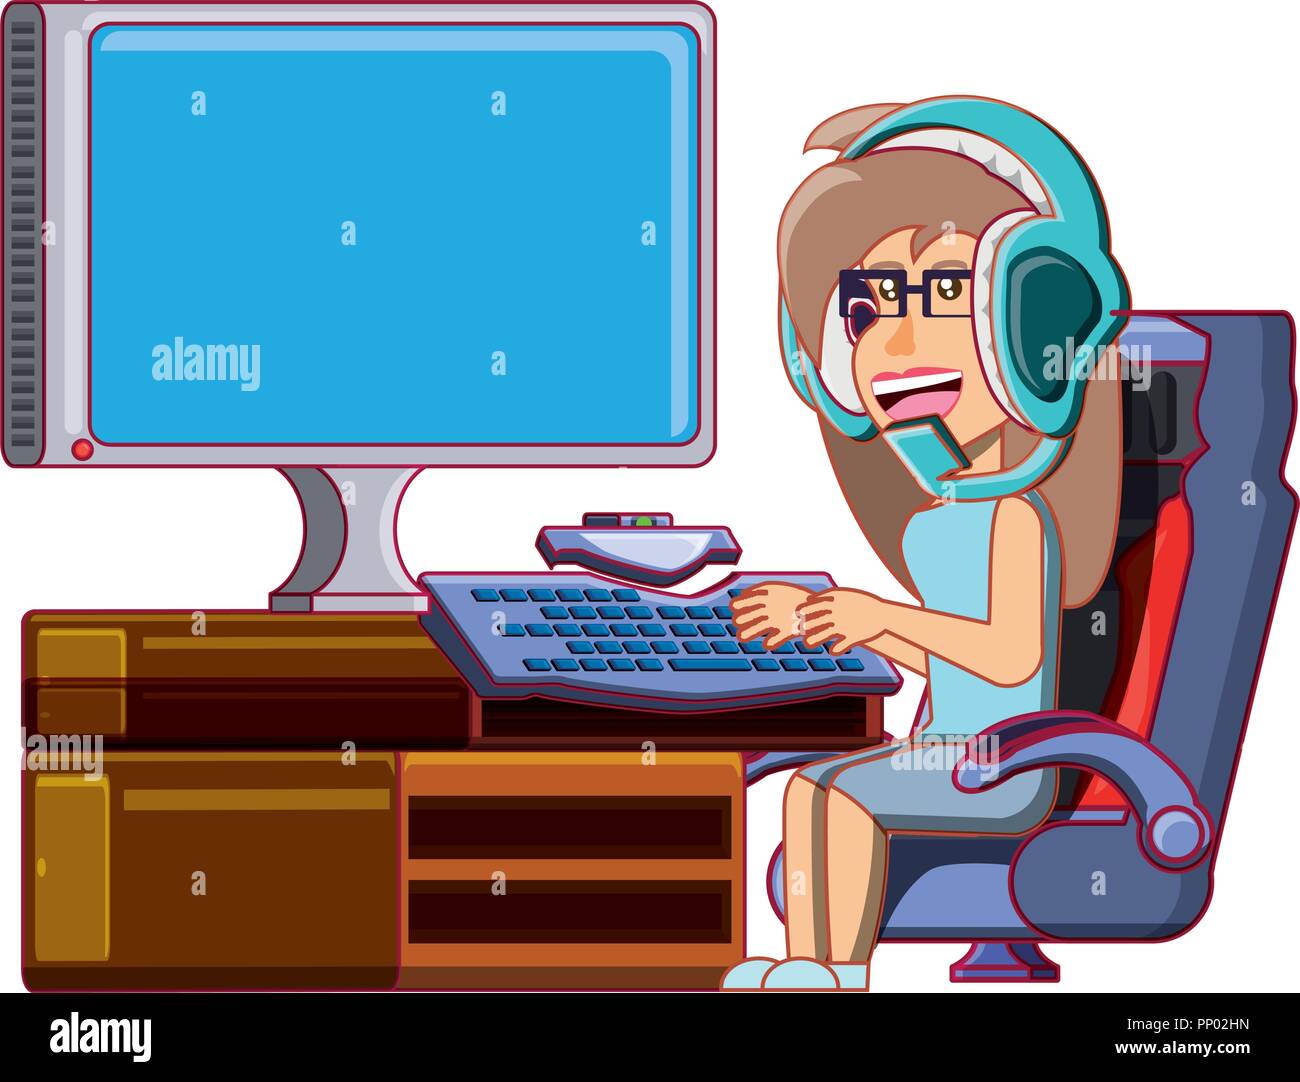 cartoon woman playing videogames on computer over white background, vector illustration Stock Vector